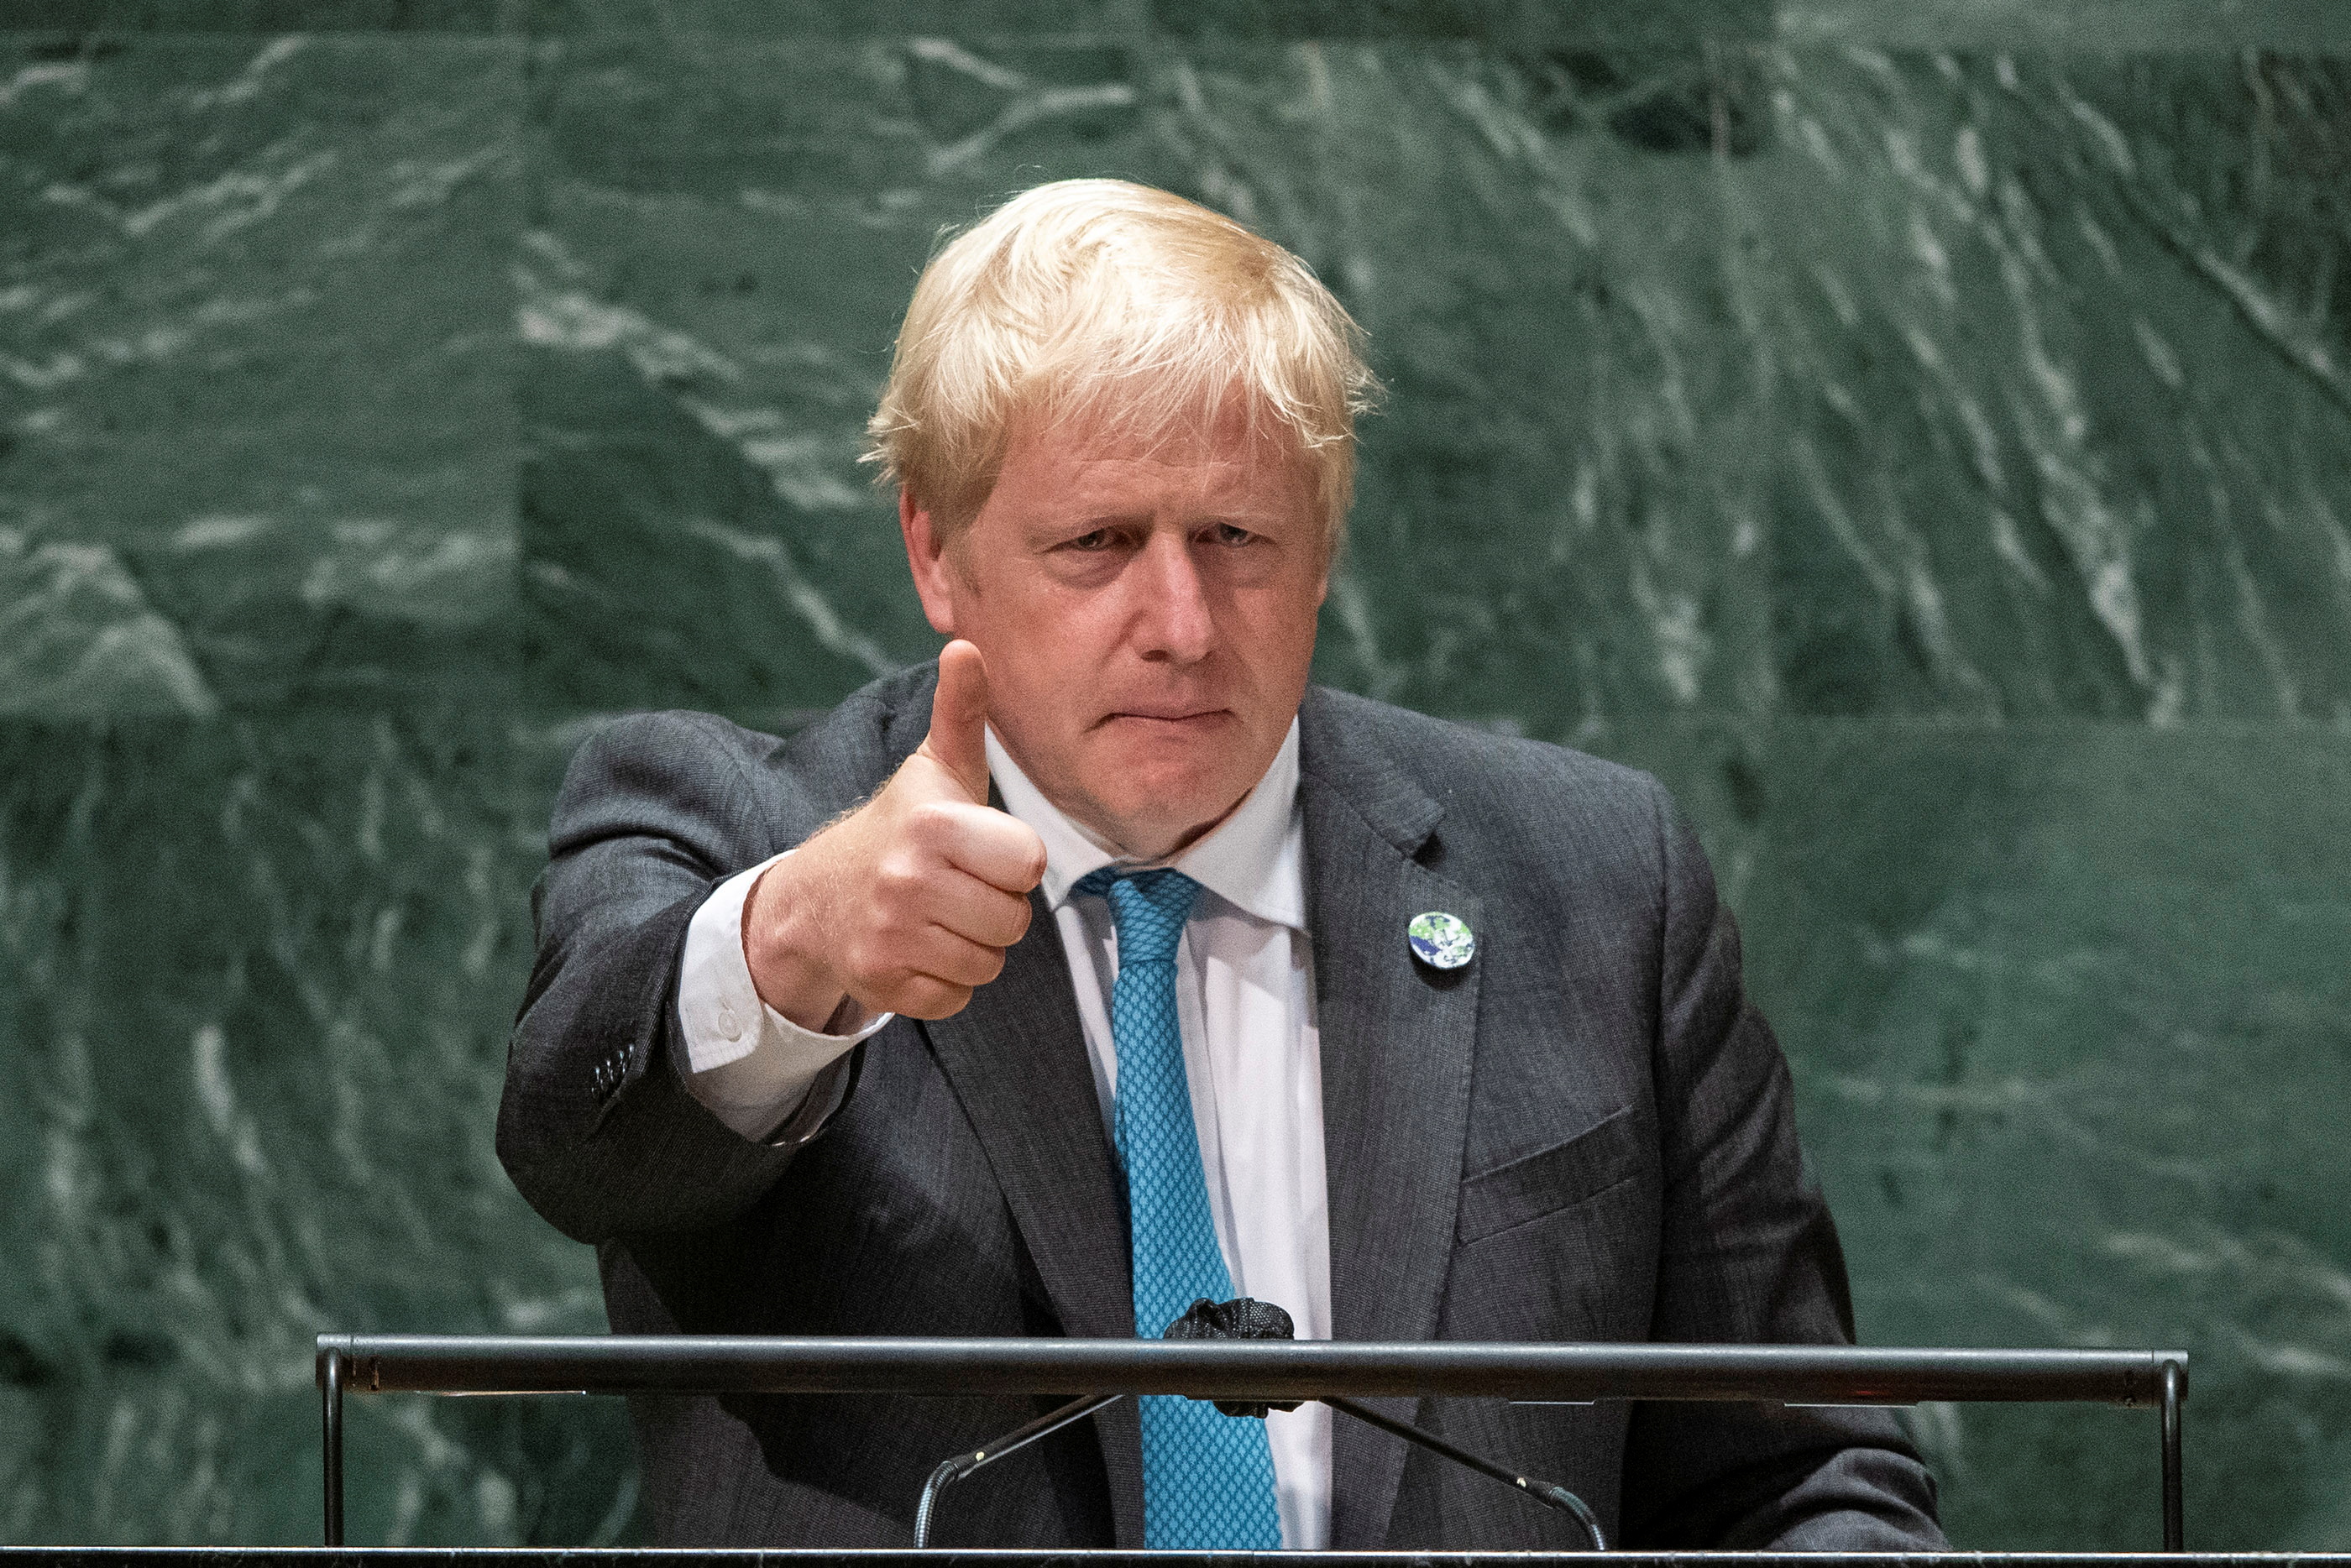 British Prime Minister Boris Johnson addresses the 76th Session of the U.N. General Assembly in New York City